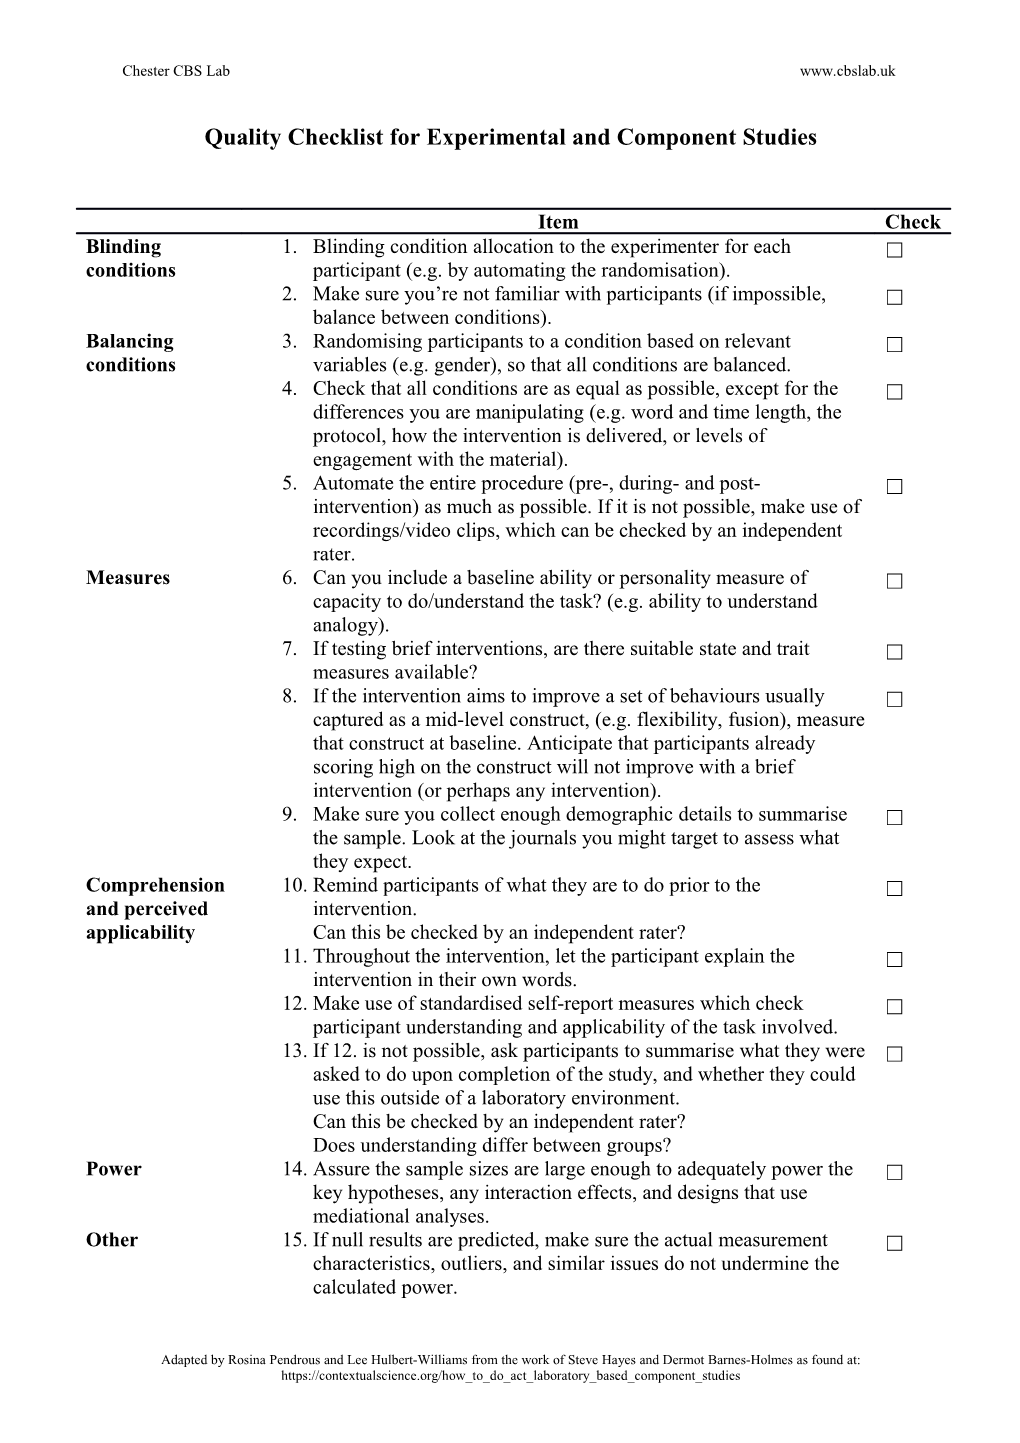 Quality Checklist for Experimental and Component Studies